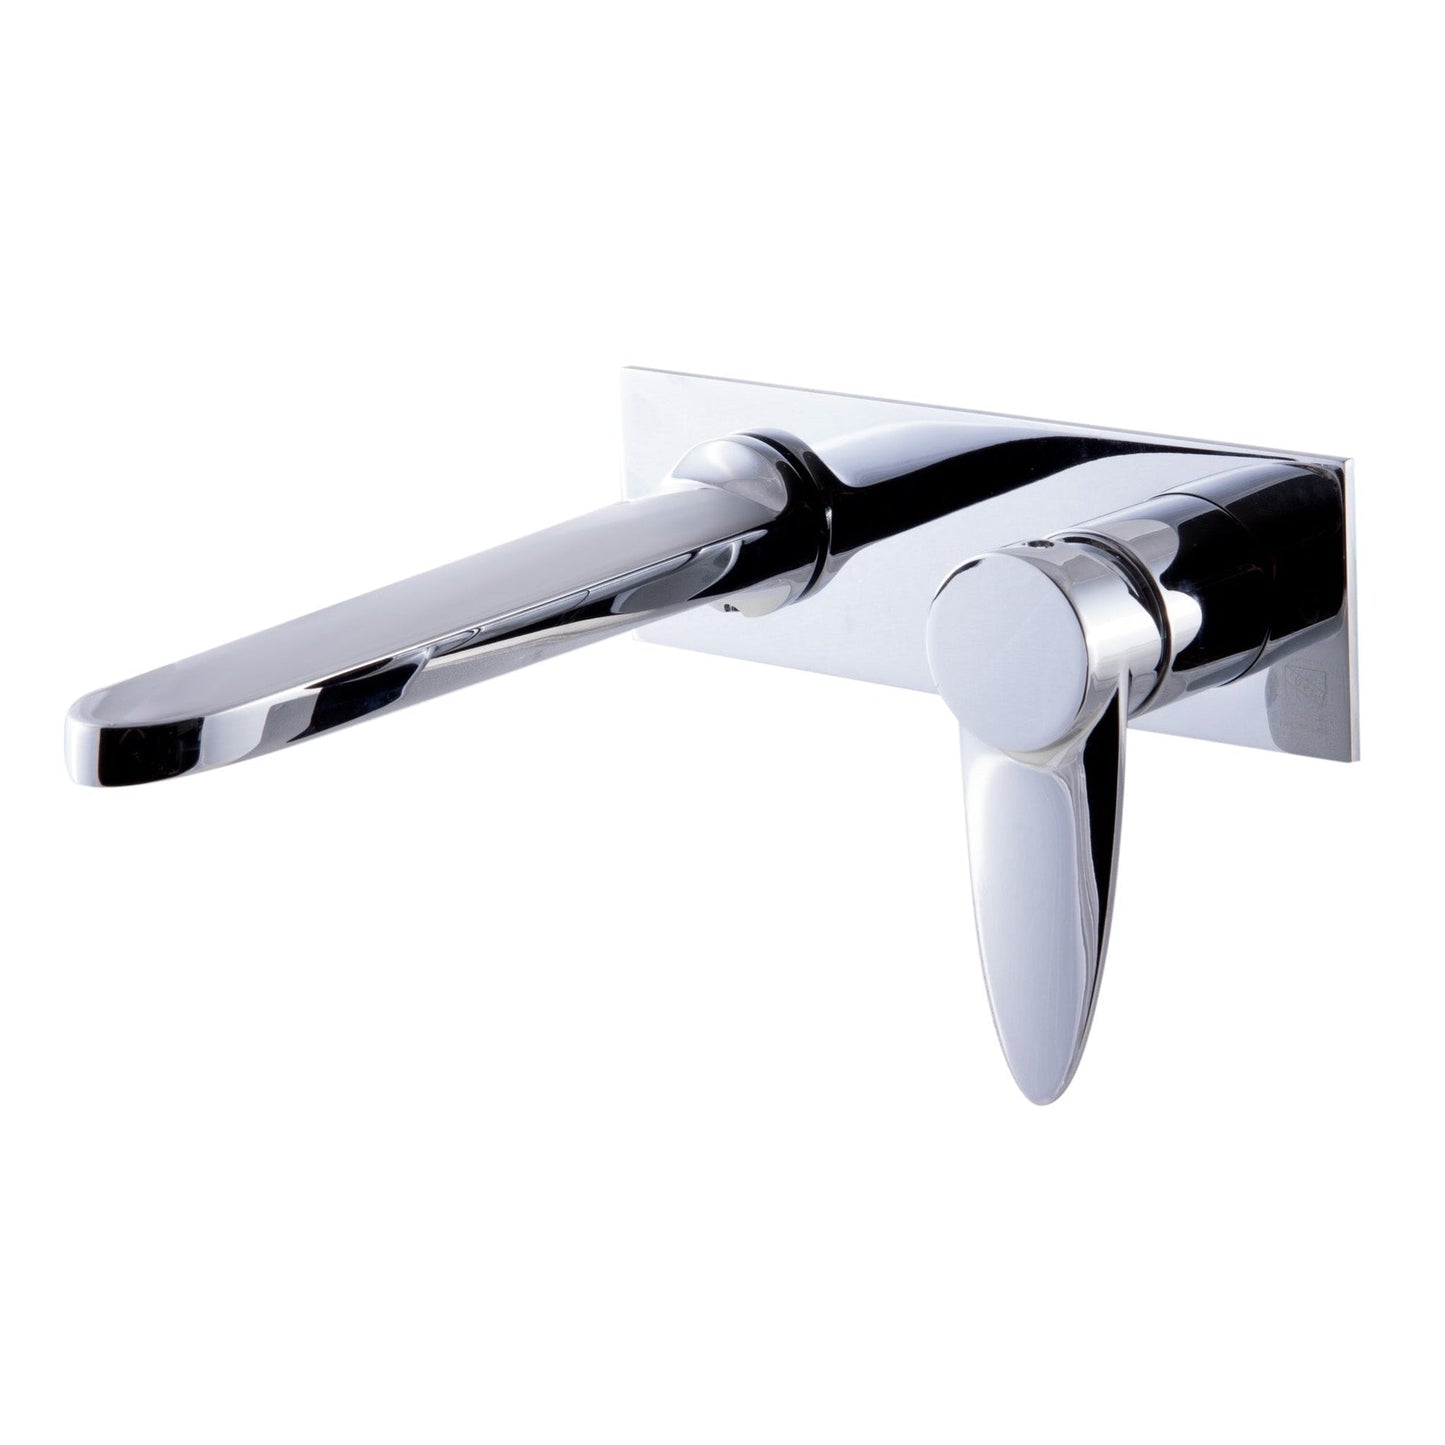 ALFI Brand AB1772-PC Polished Chrome Wall-Mounted Brass Bathroom Sink Faucet With Single Lever